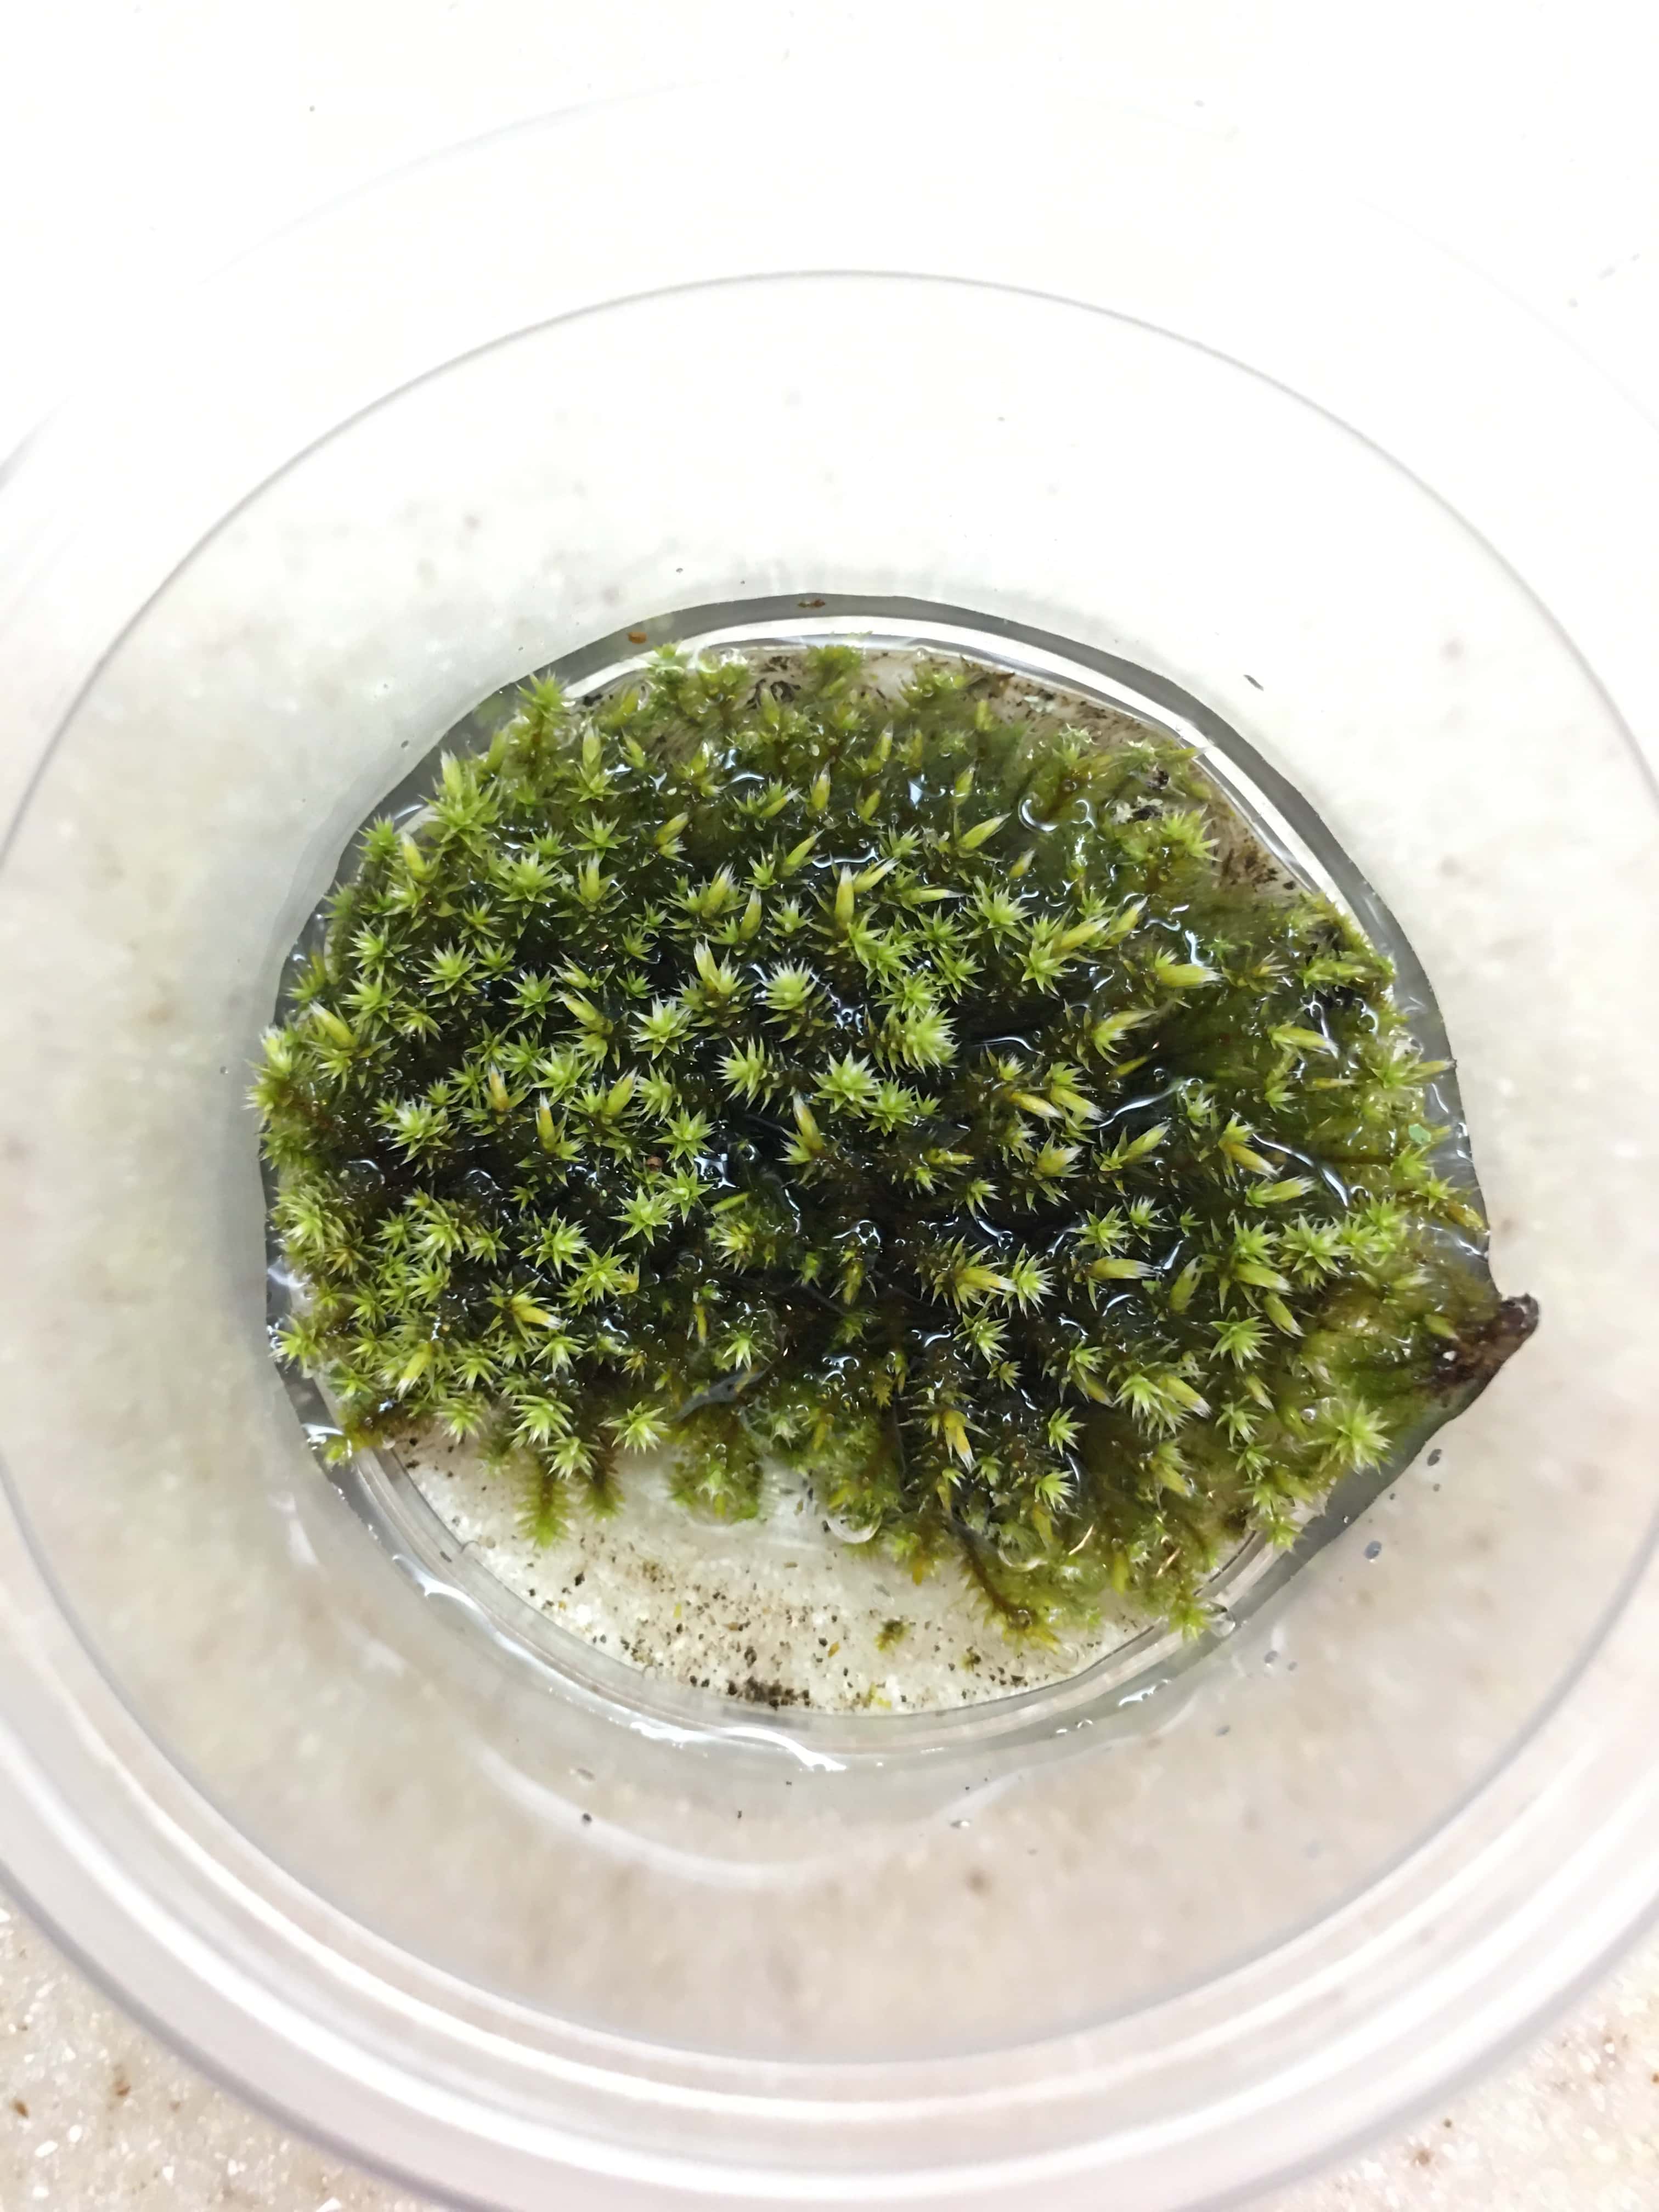 Moss sample in water.